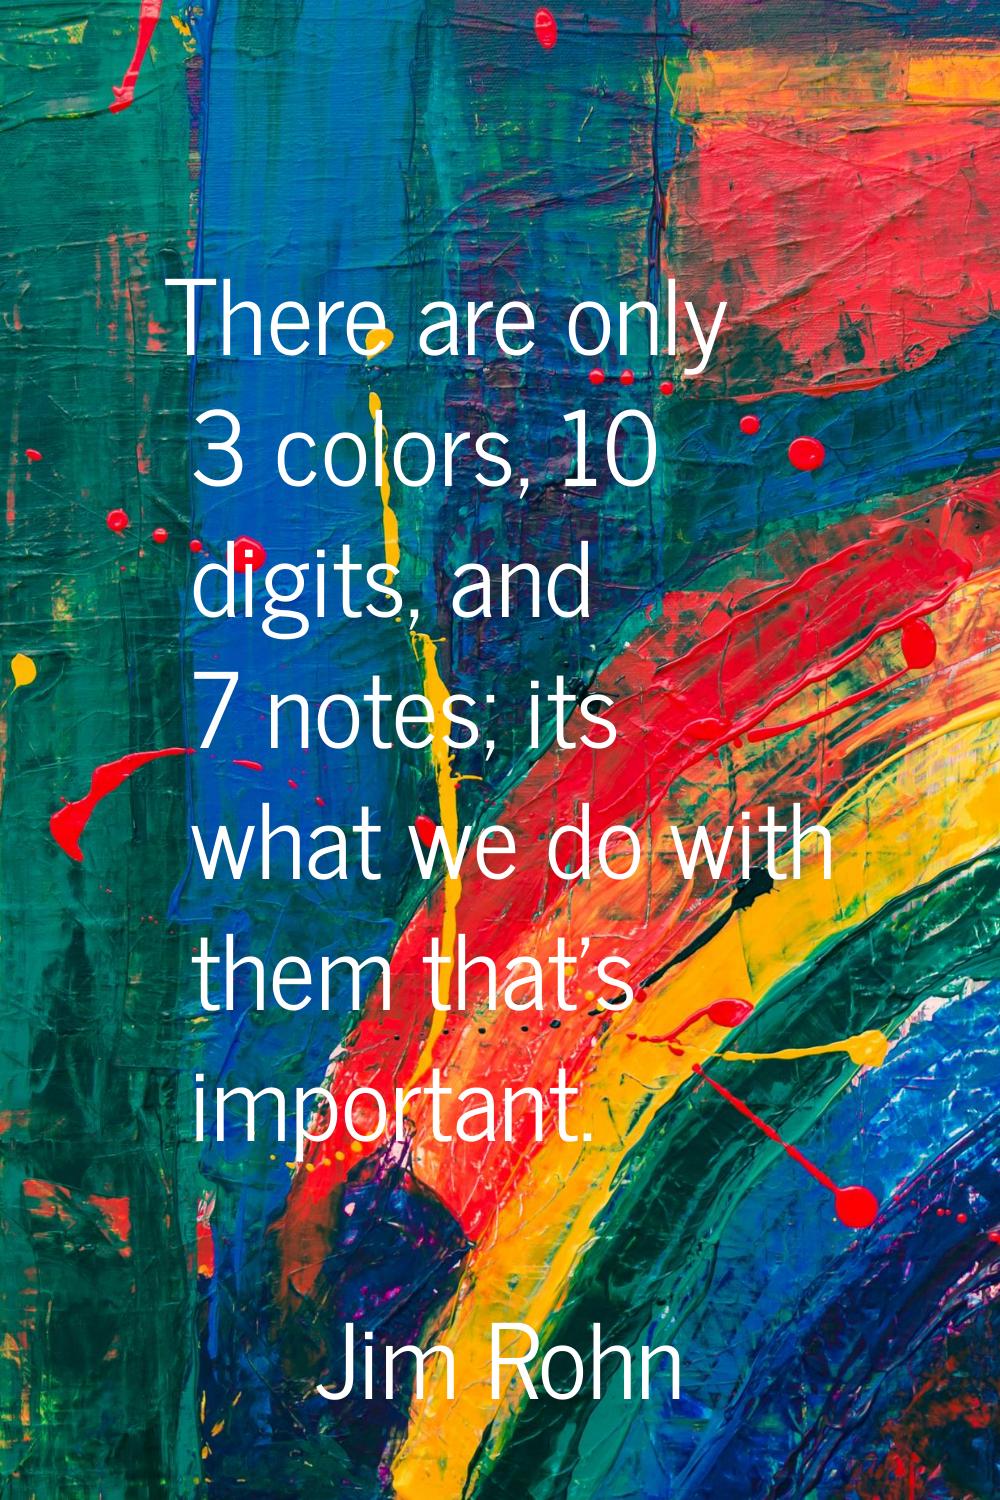 There are only 3 colors, 10 digits, and 7 notes; its what we do with them that's important.